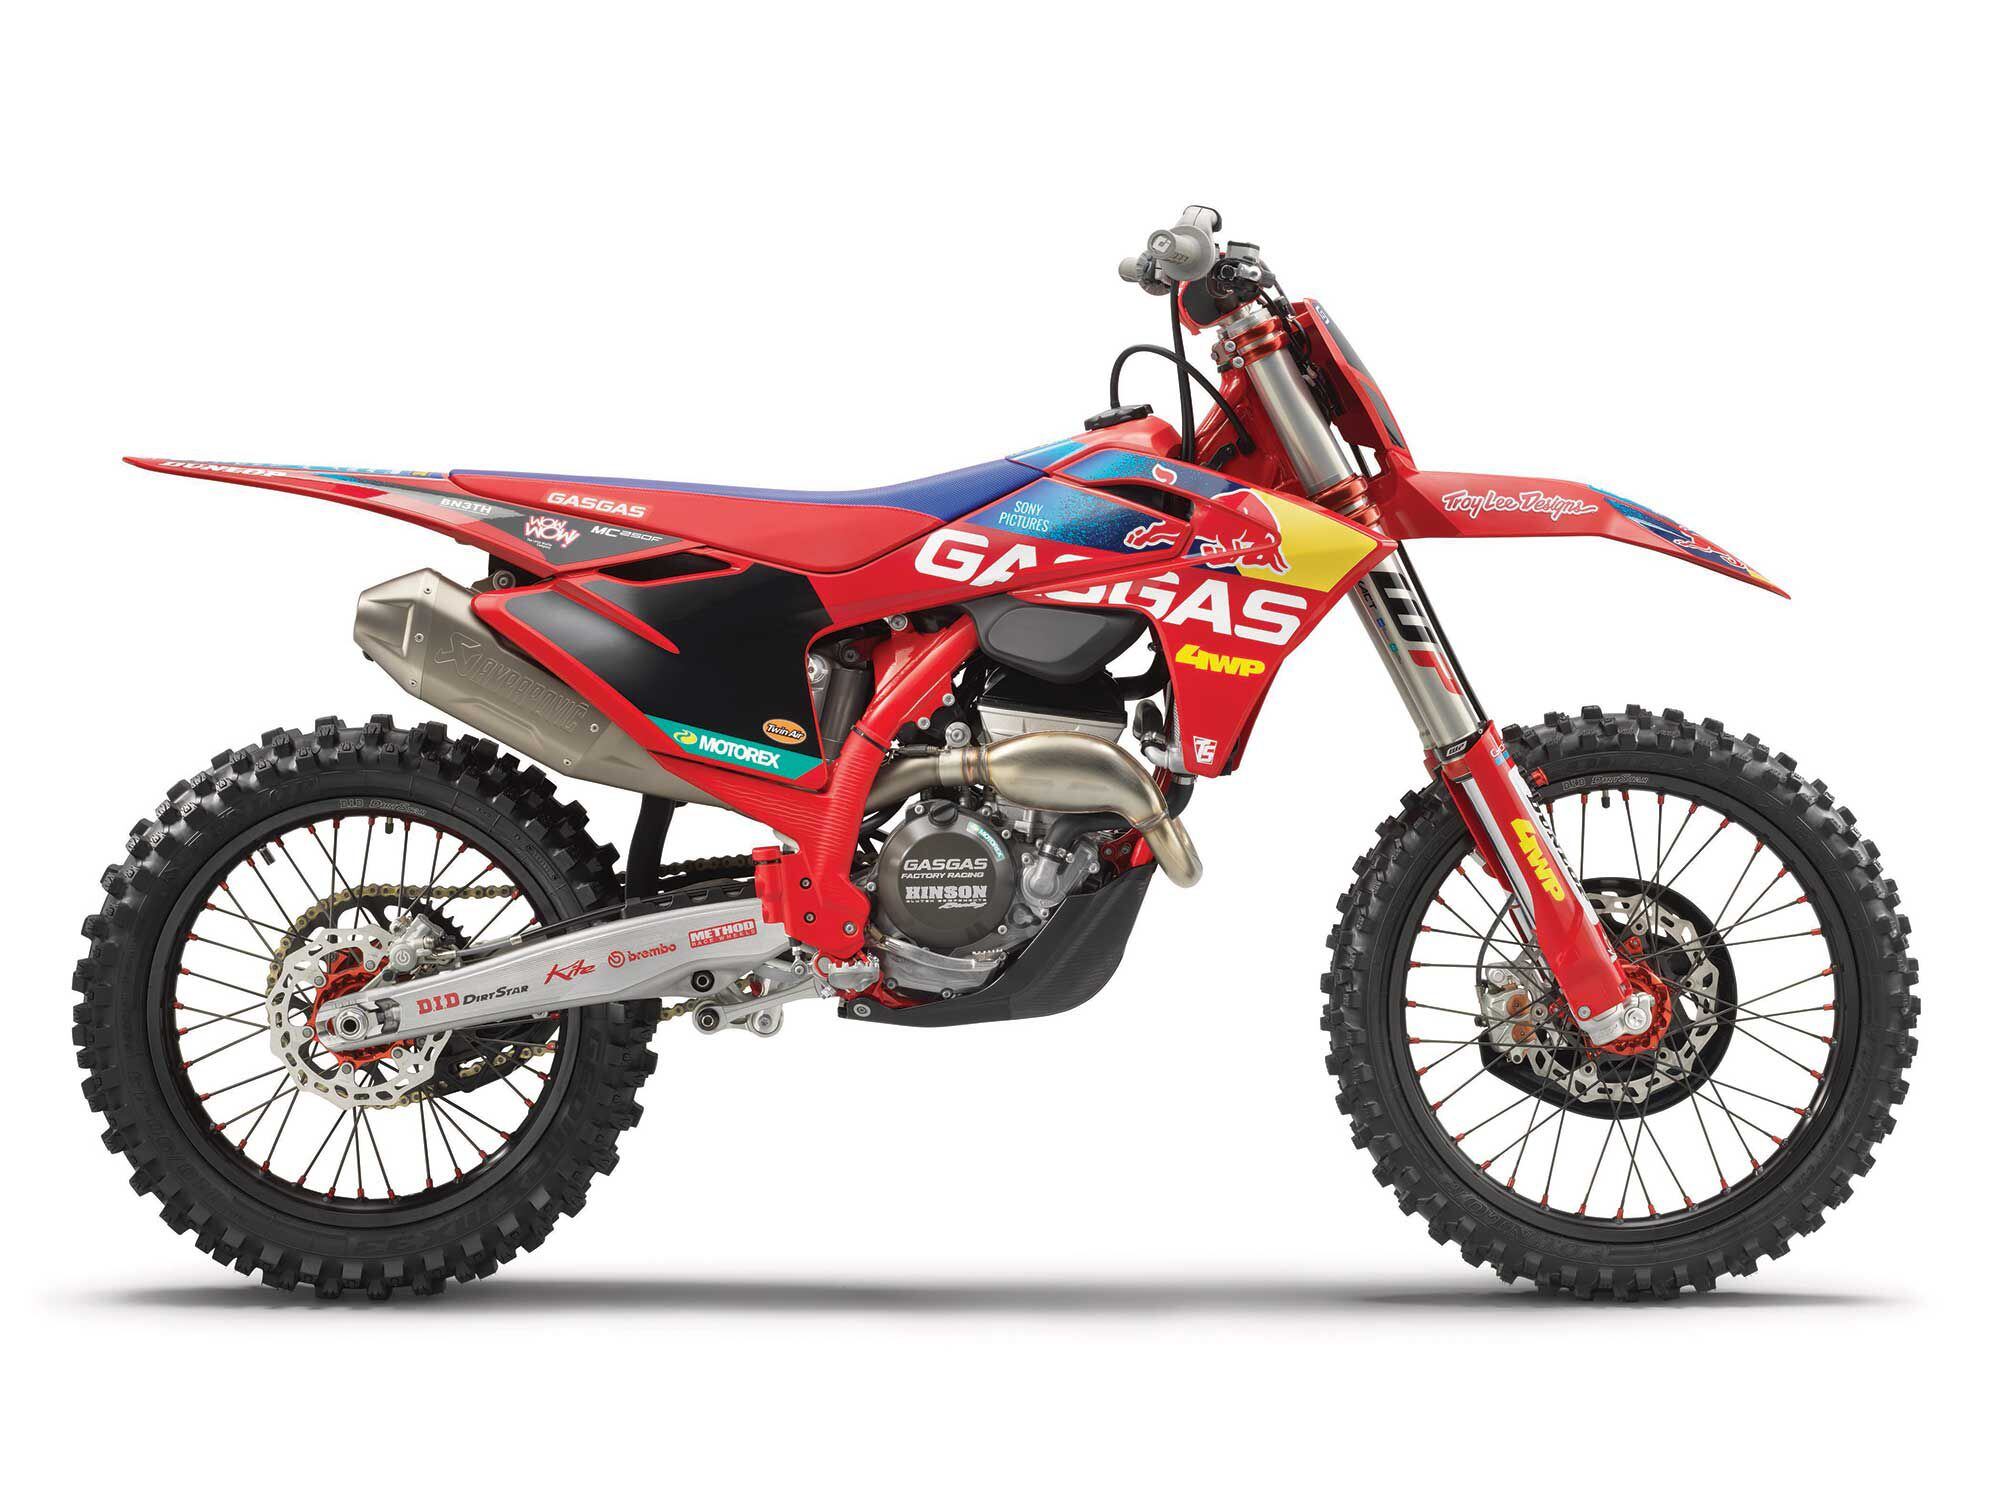 Brand-new for 2023, the GasGas MC 250F Factory Edition mimics the Red Bull Troy Lee Designs race team bikes in more than just aesthetics. The engine is completely new, being more compact, lighter, and even more powerful than the standard version, the Akrapovič exhaust just part of the equation. It’s aimed at the more aggressive rider who’ll appreciate the extra juice and firmer up-spec WP suspension (shared with the 450).